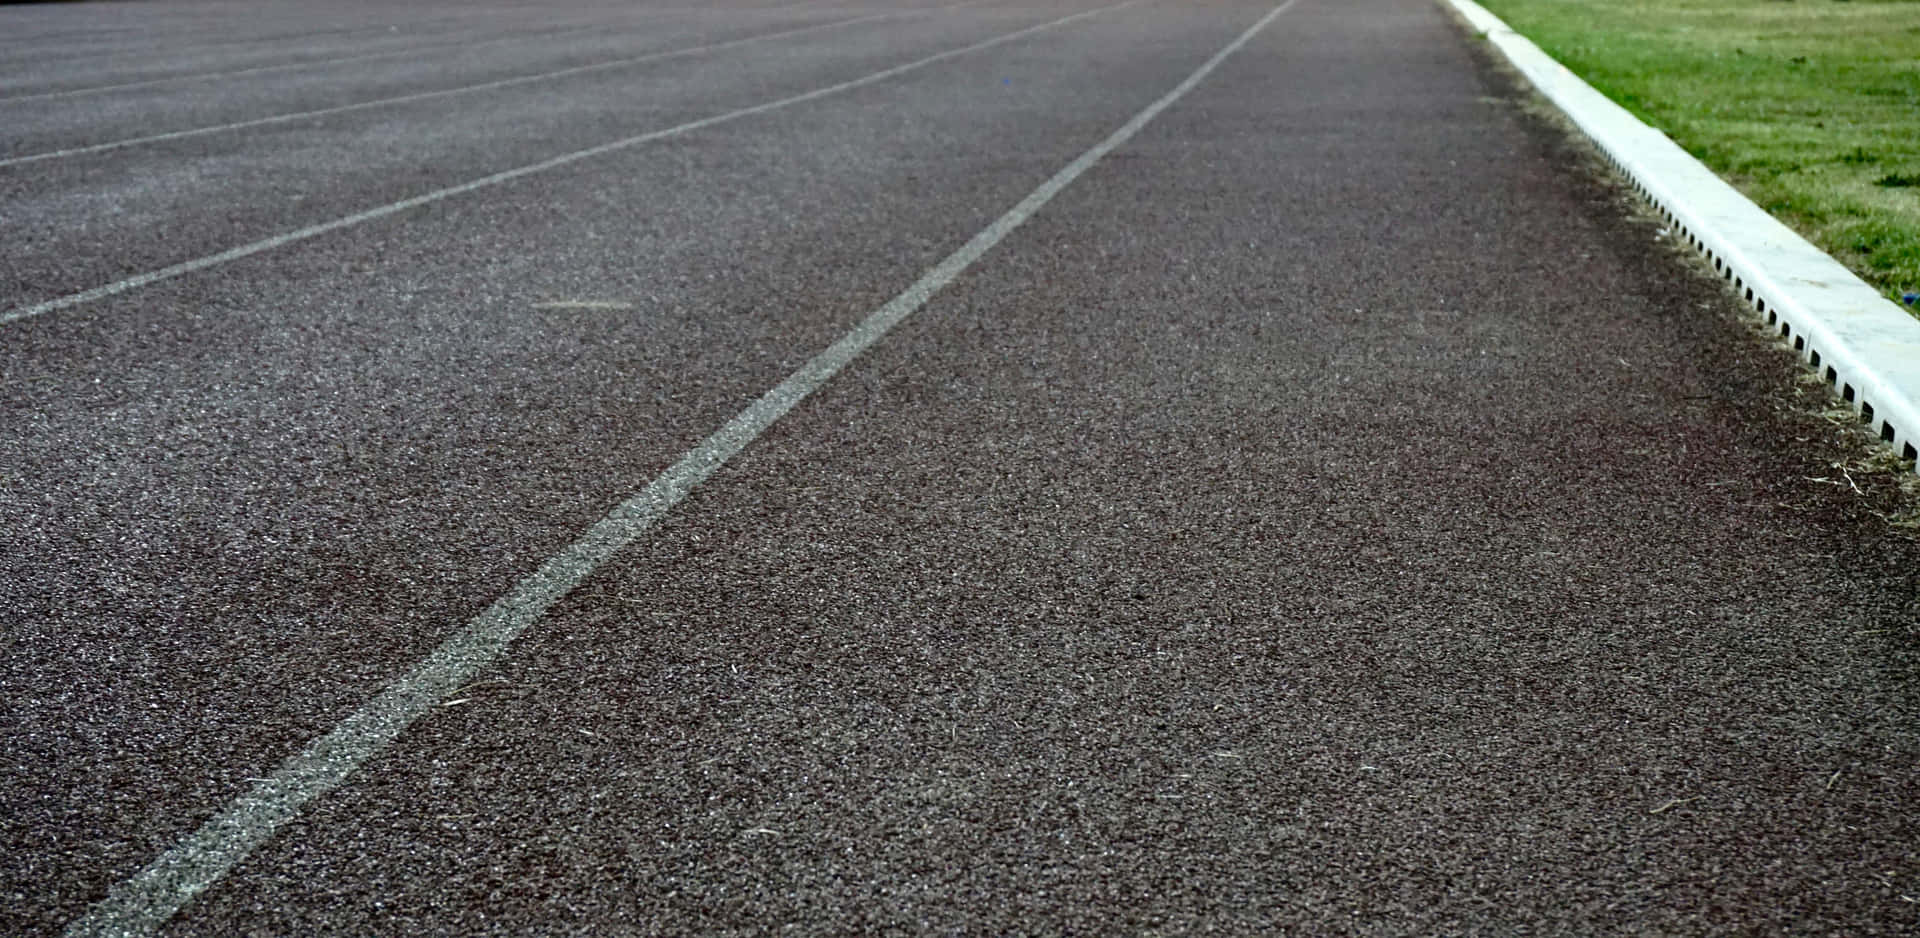 A Running Track With A White Line